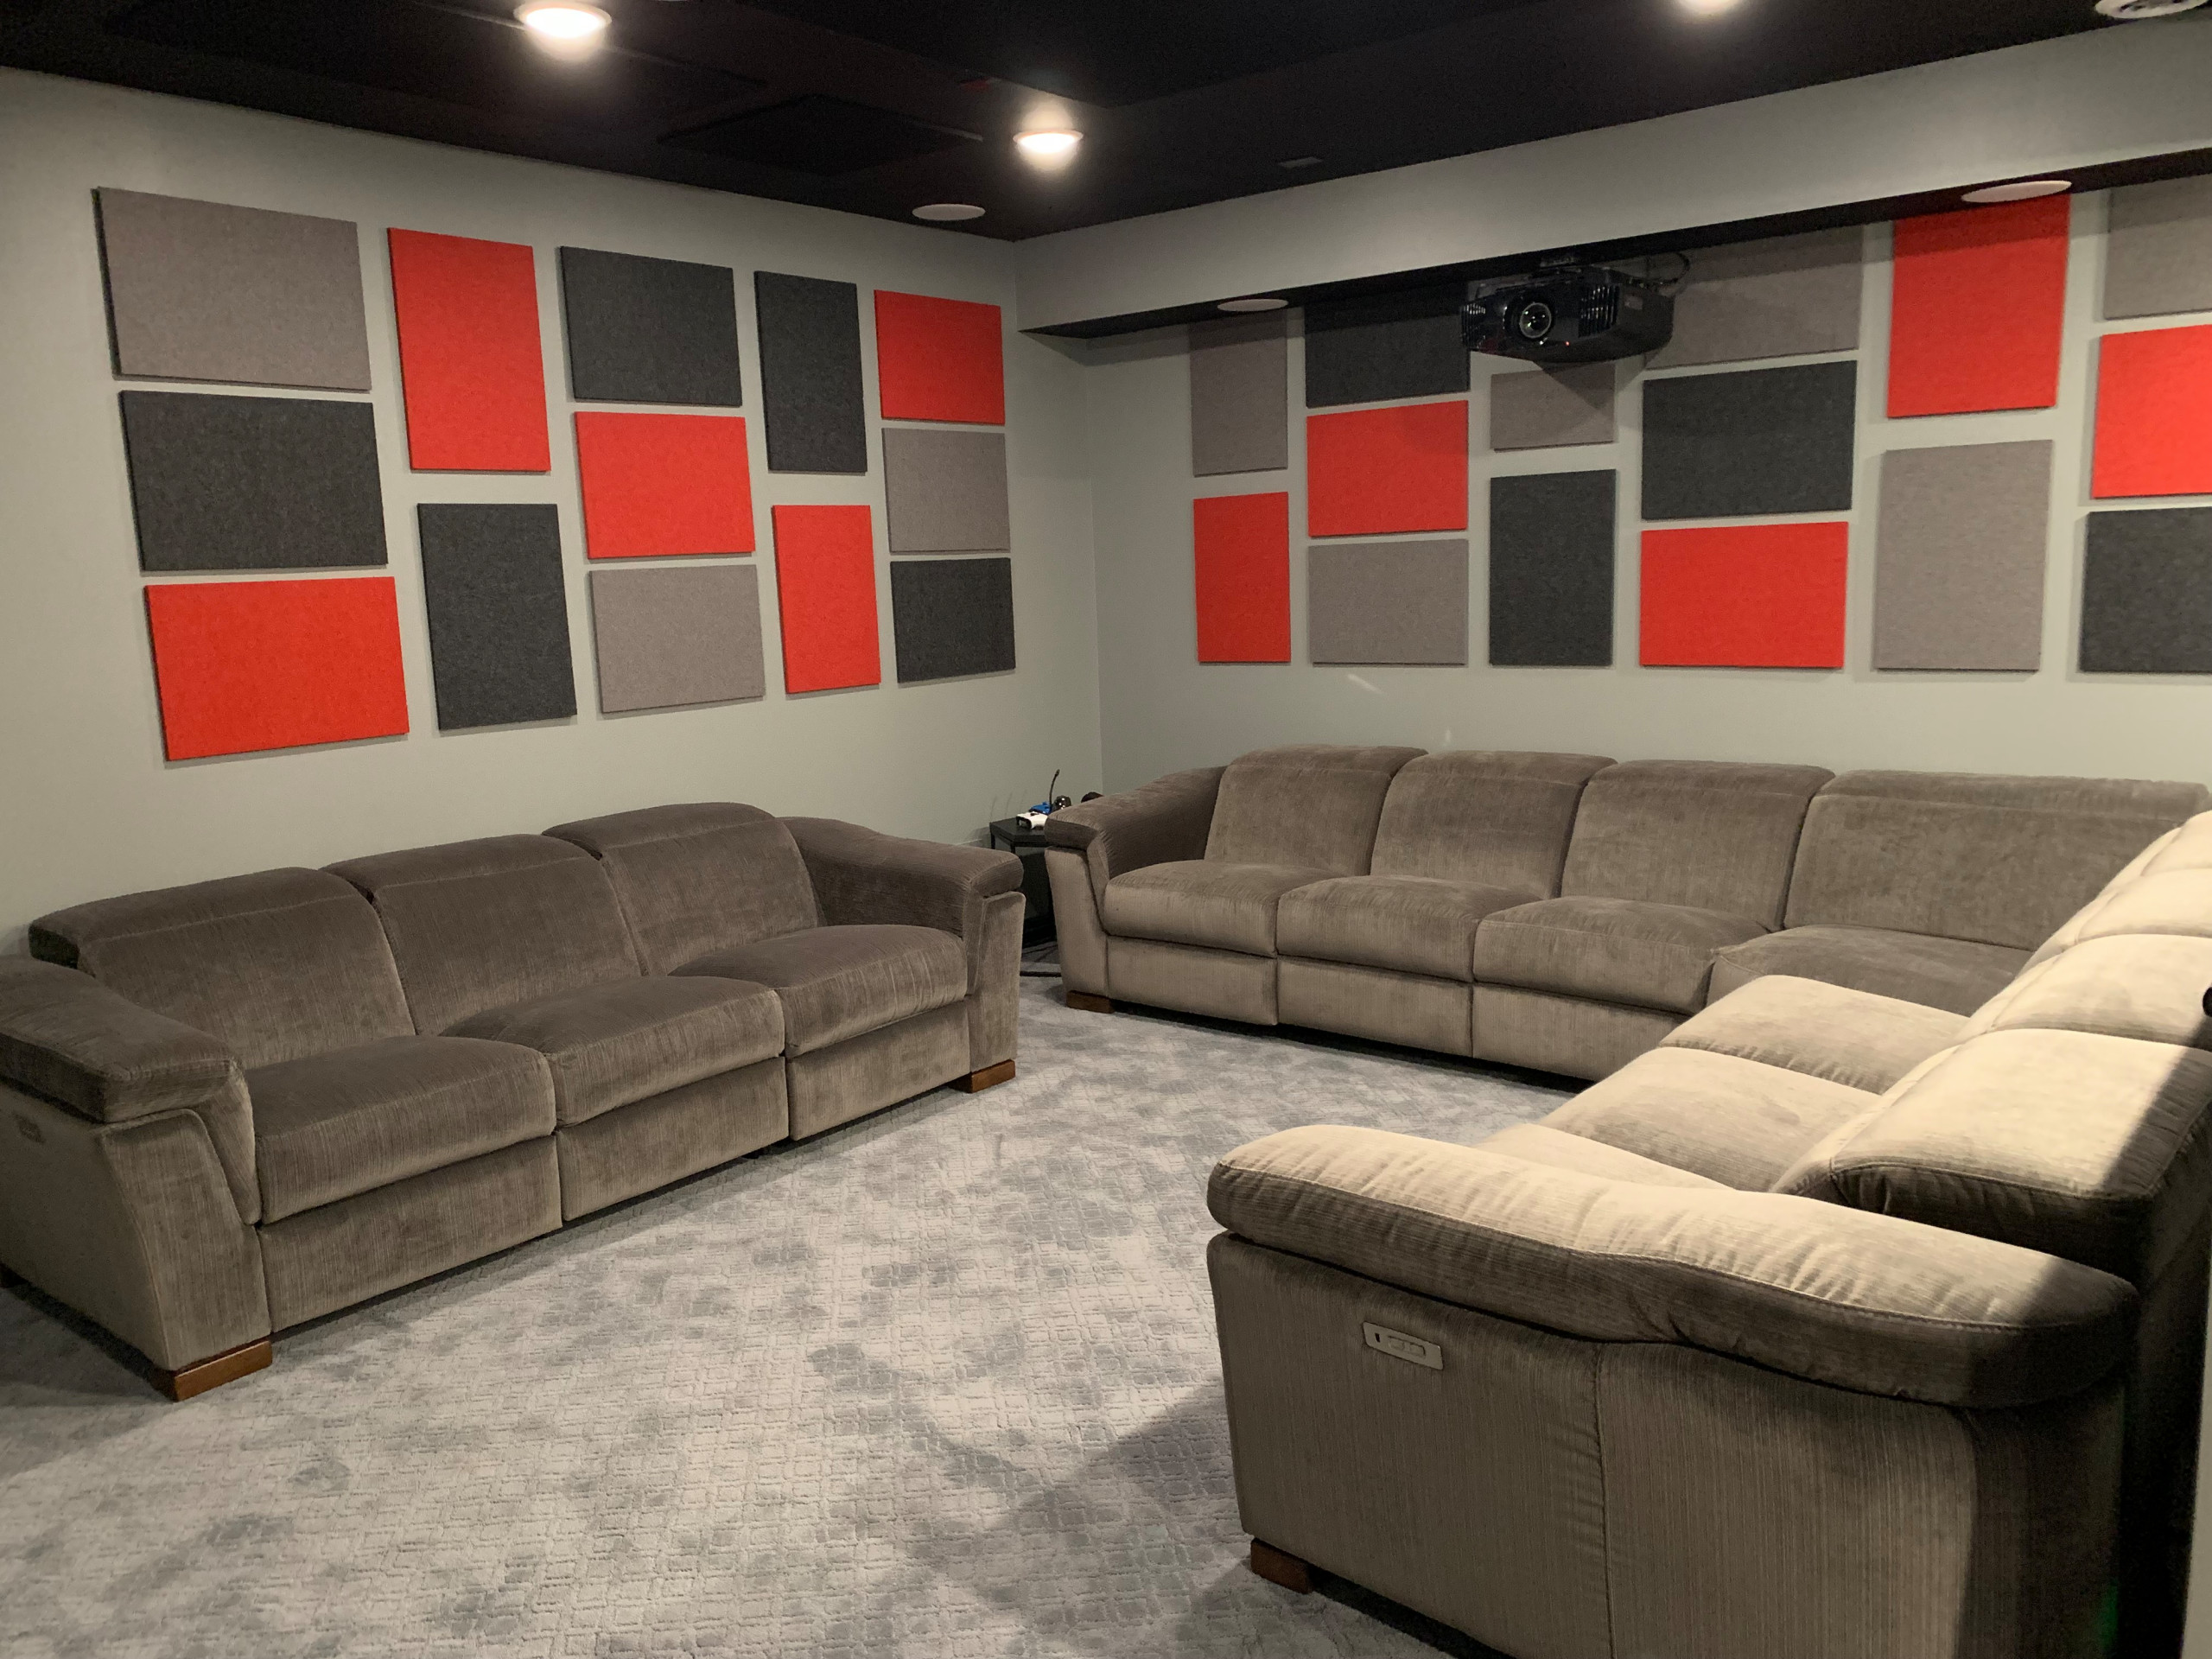 Lower Level gaming and theater room